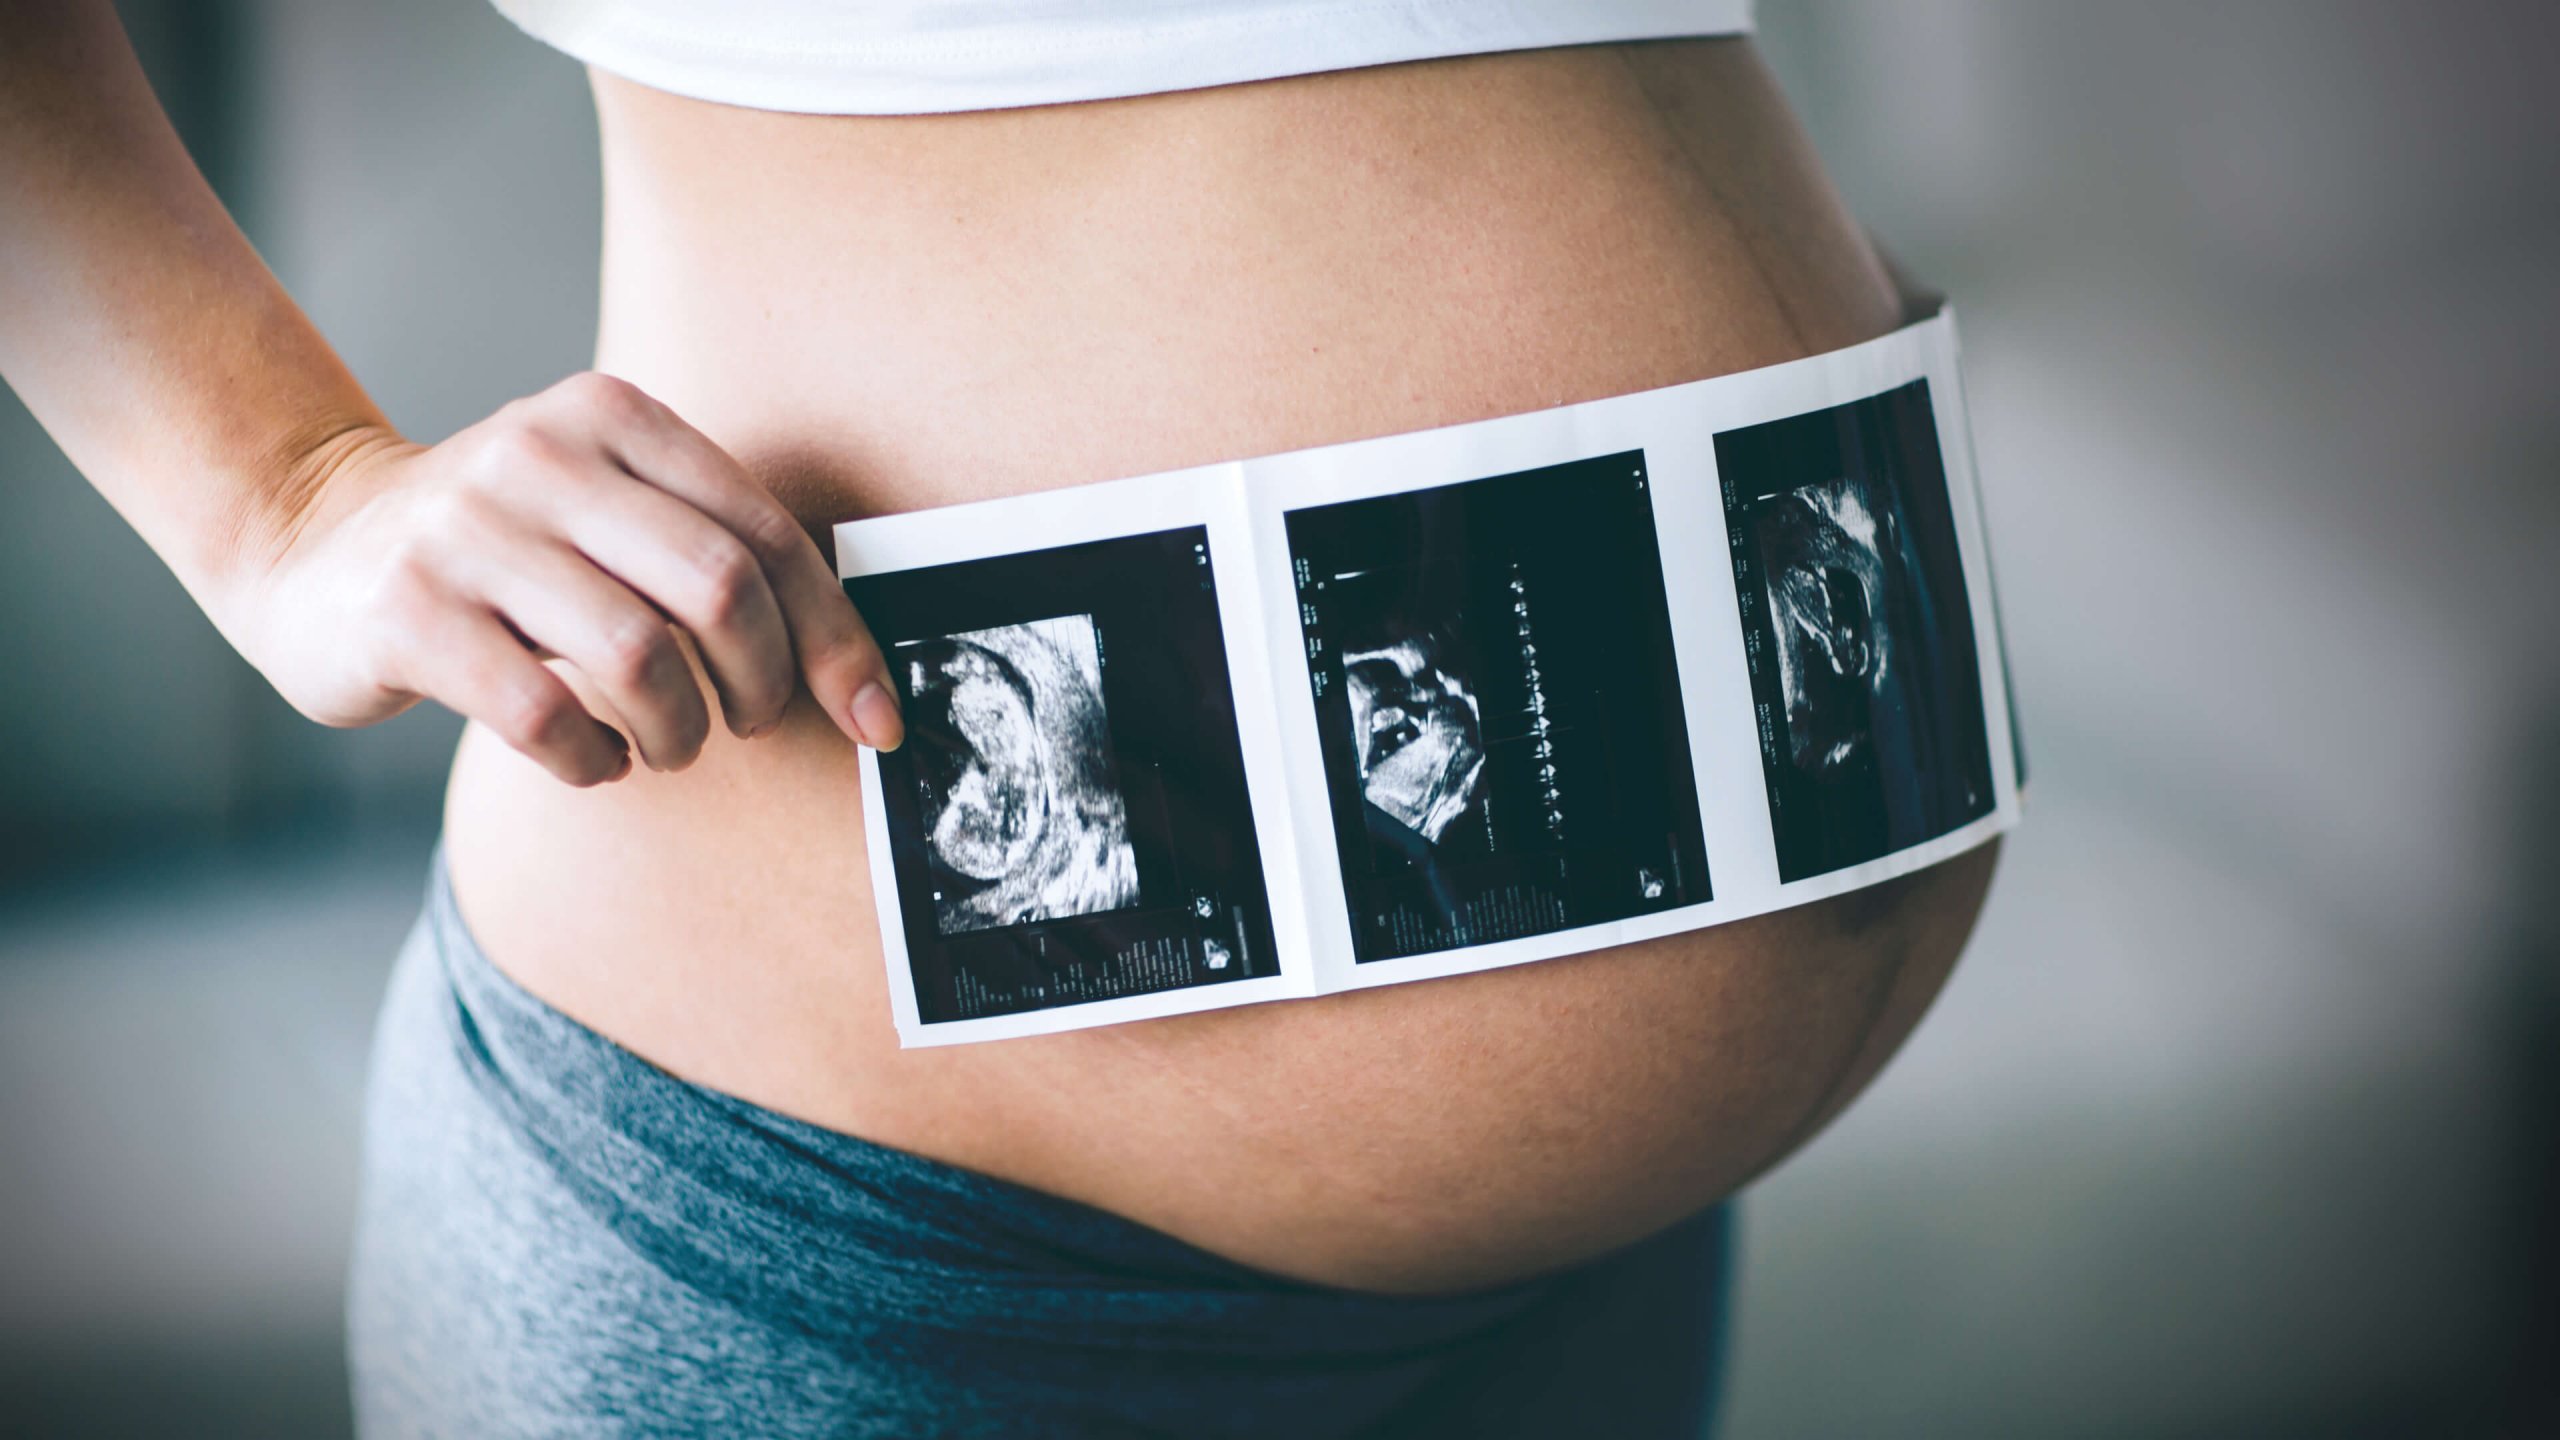 Here's info on the risks vs. rewards of pregnancy ultrasounds - plus a "middle way" to help you reap all the benefits and minimize the dangers.